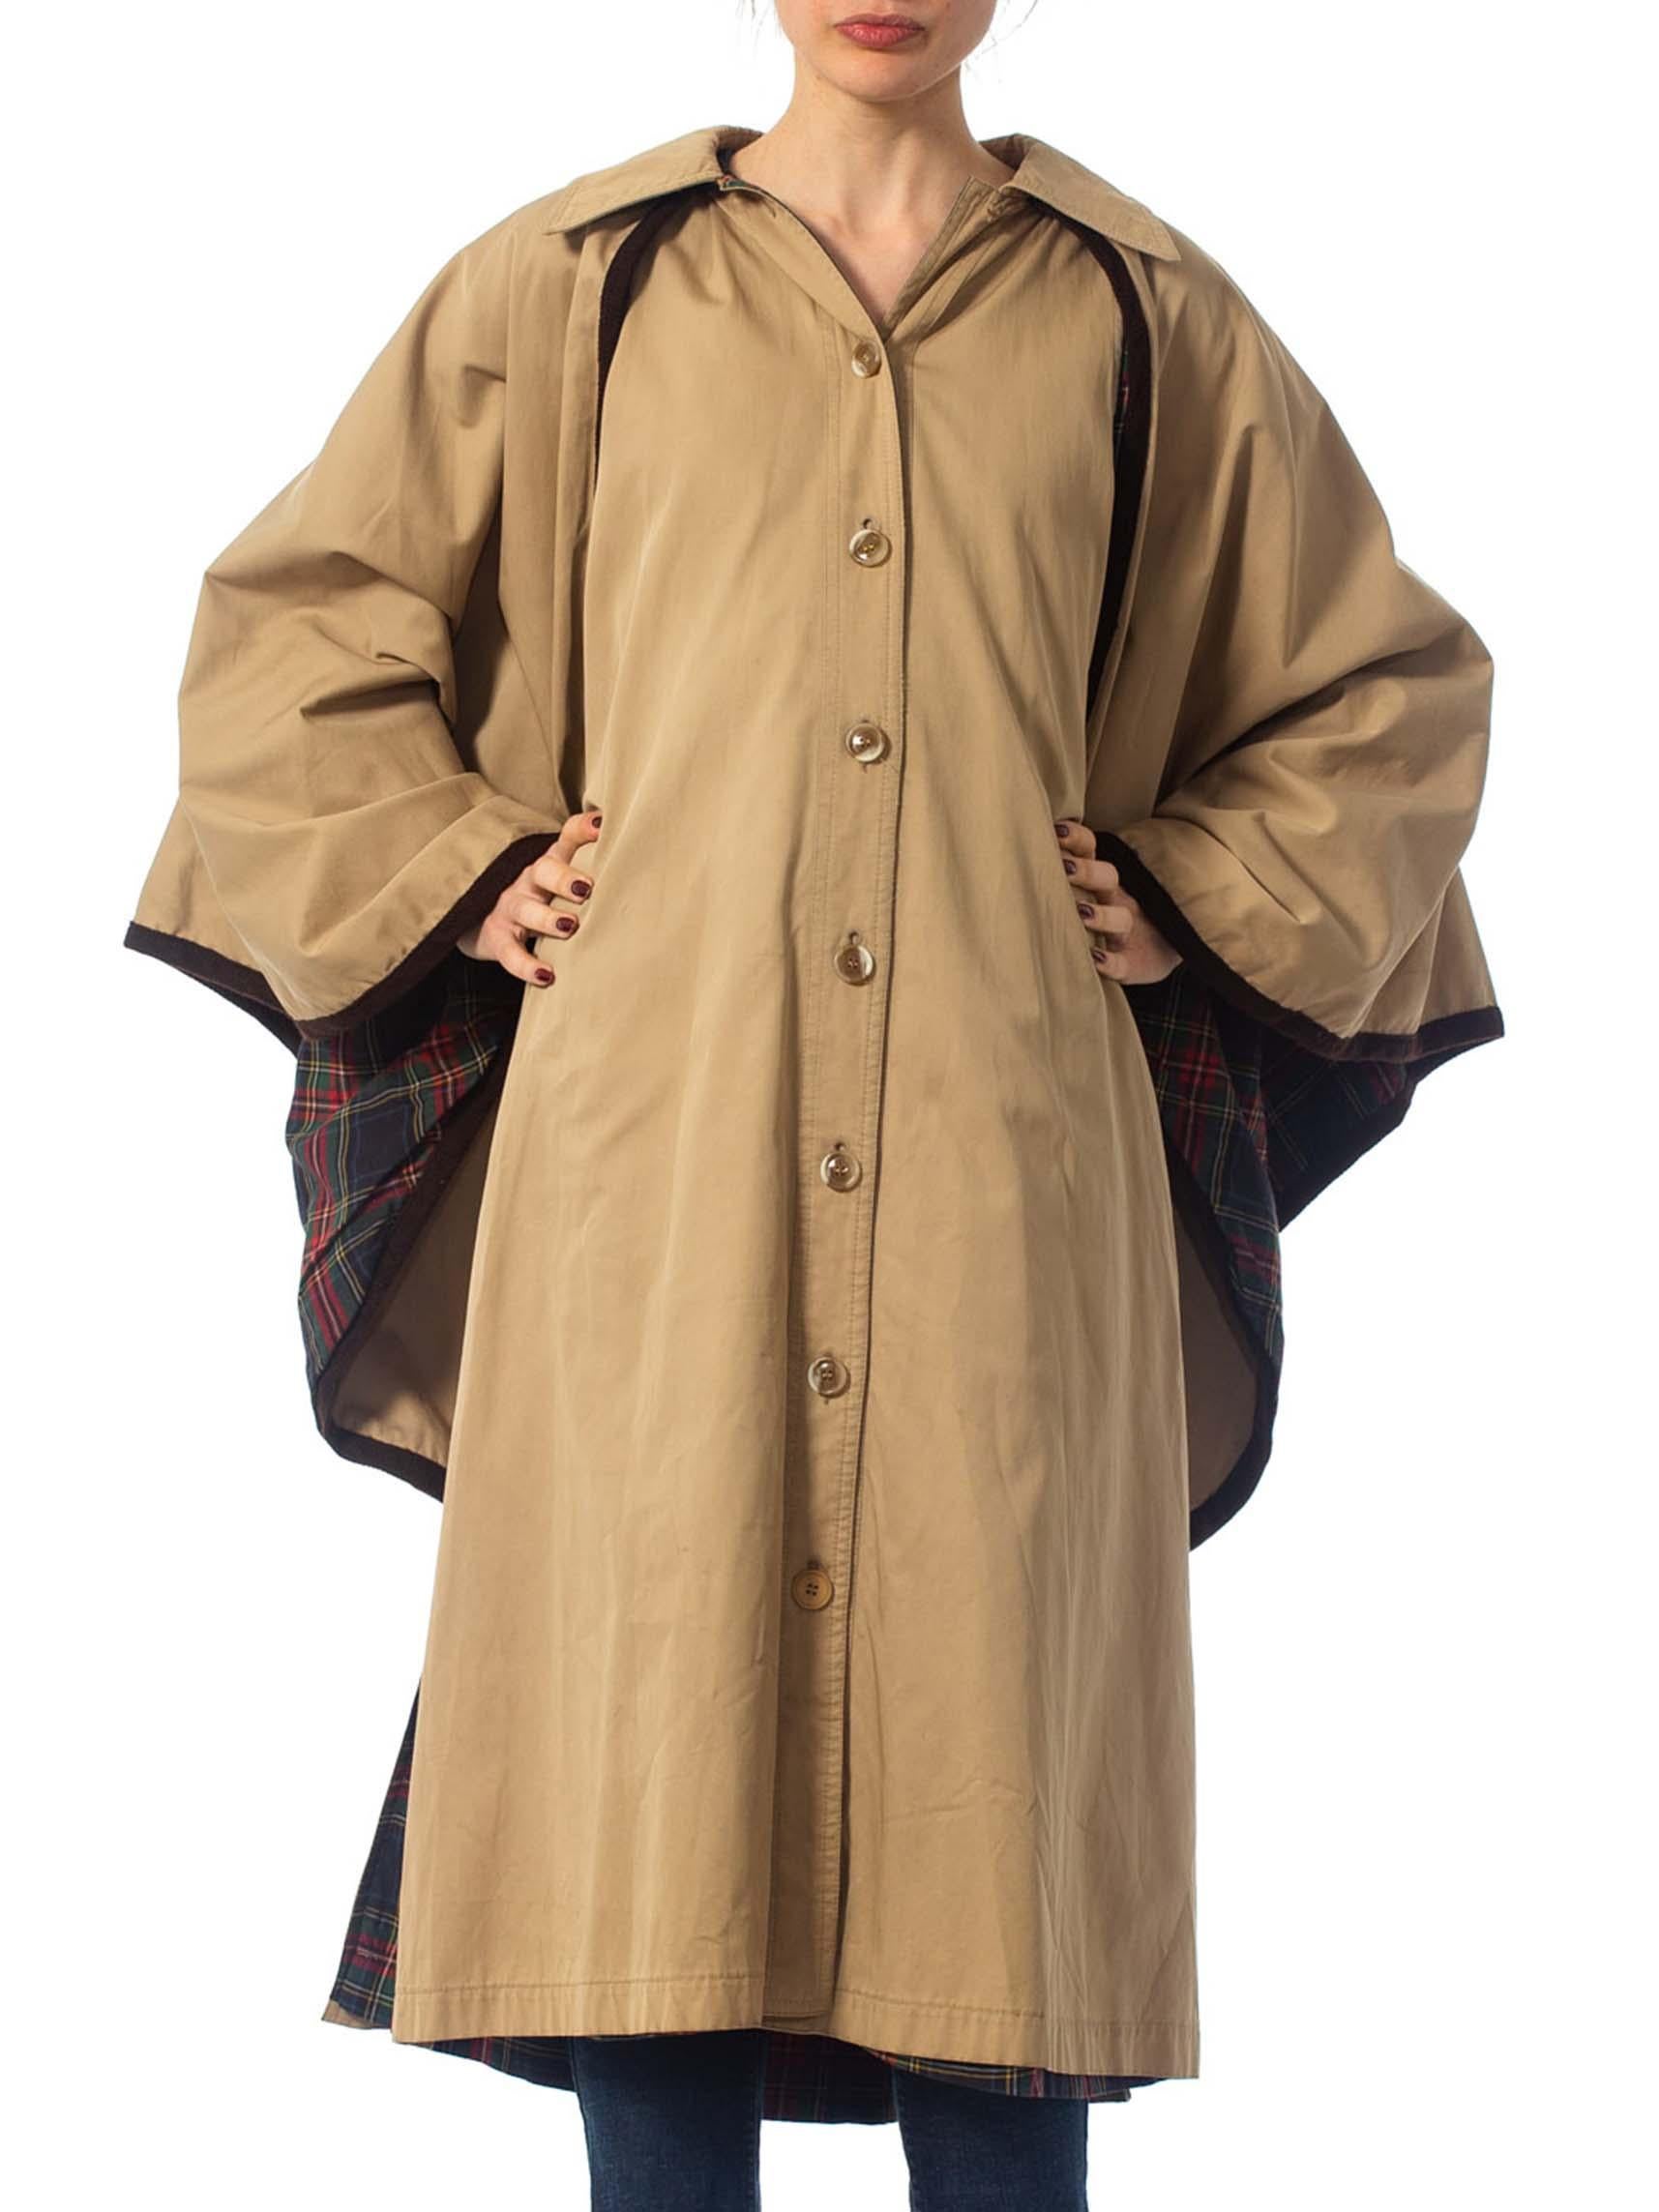 Brown 1970S YVES SAINT LAURENT Poly/Cotton Trench Coat With Attached Cape Lined In A 